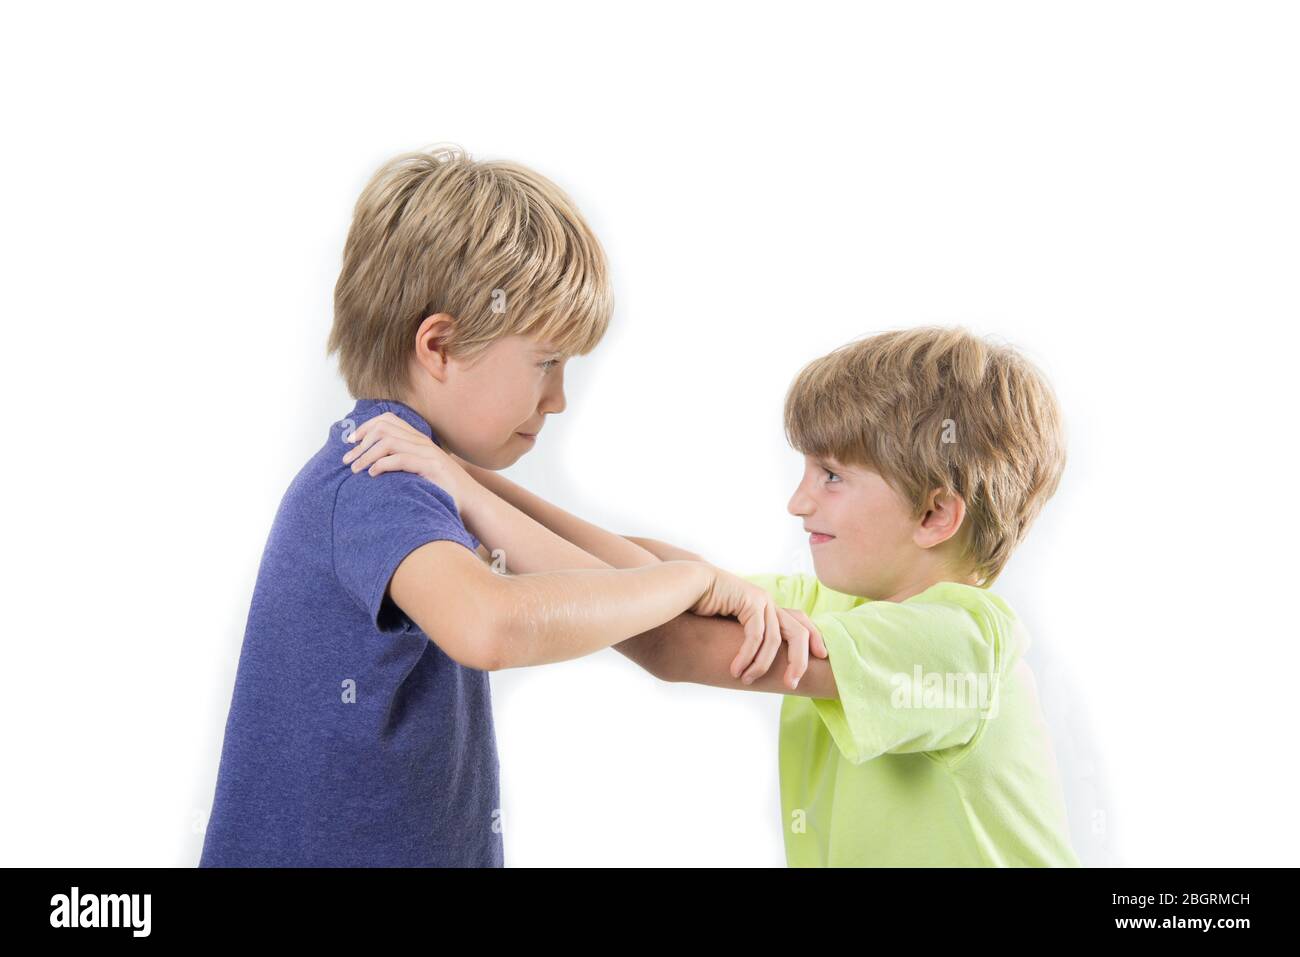 Two kids fighting, siblings, friends fight isolated on a white background Stock Photo